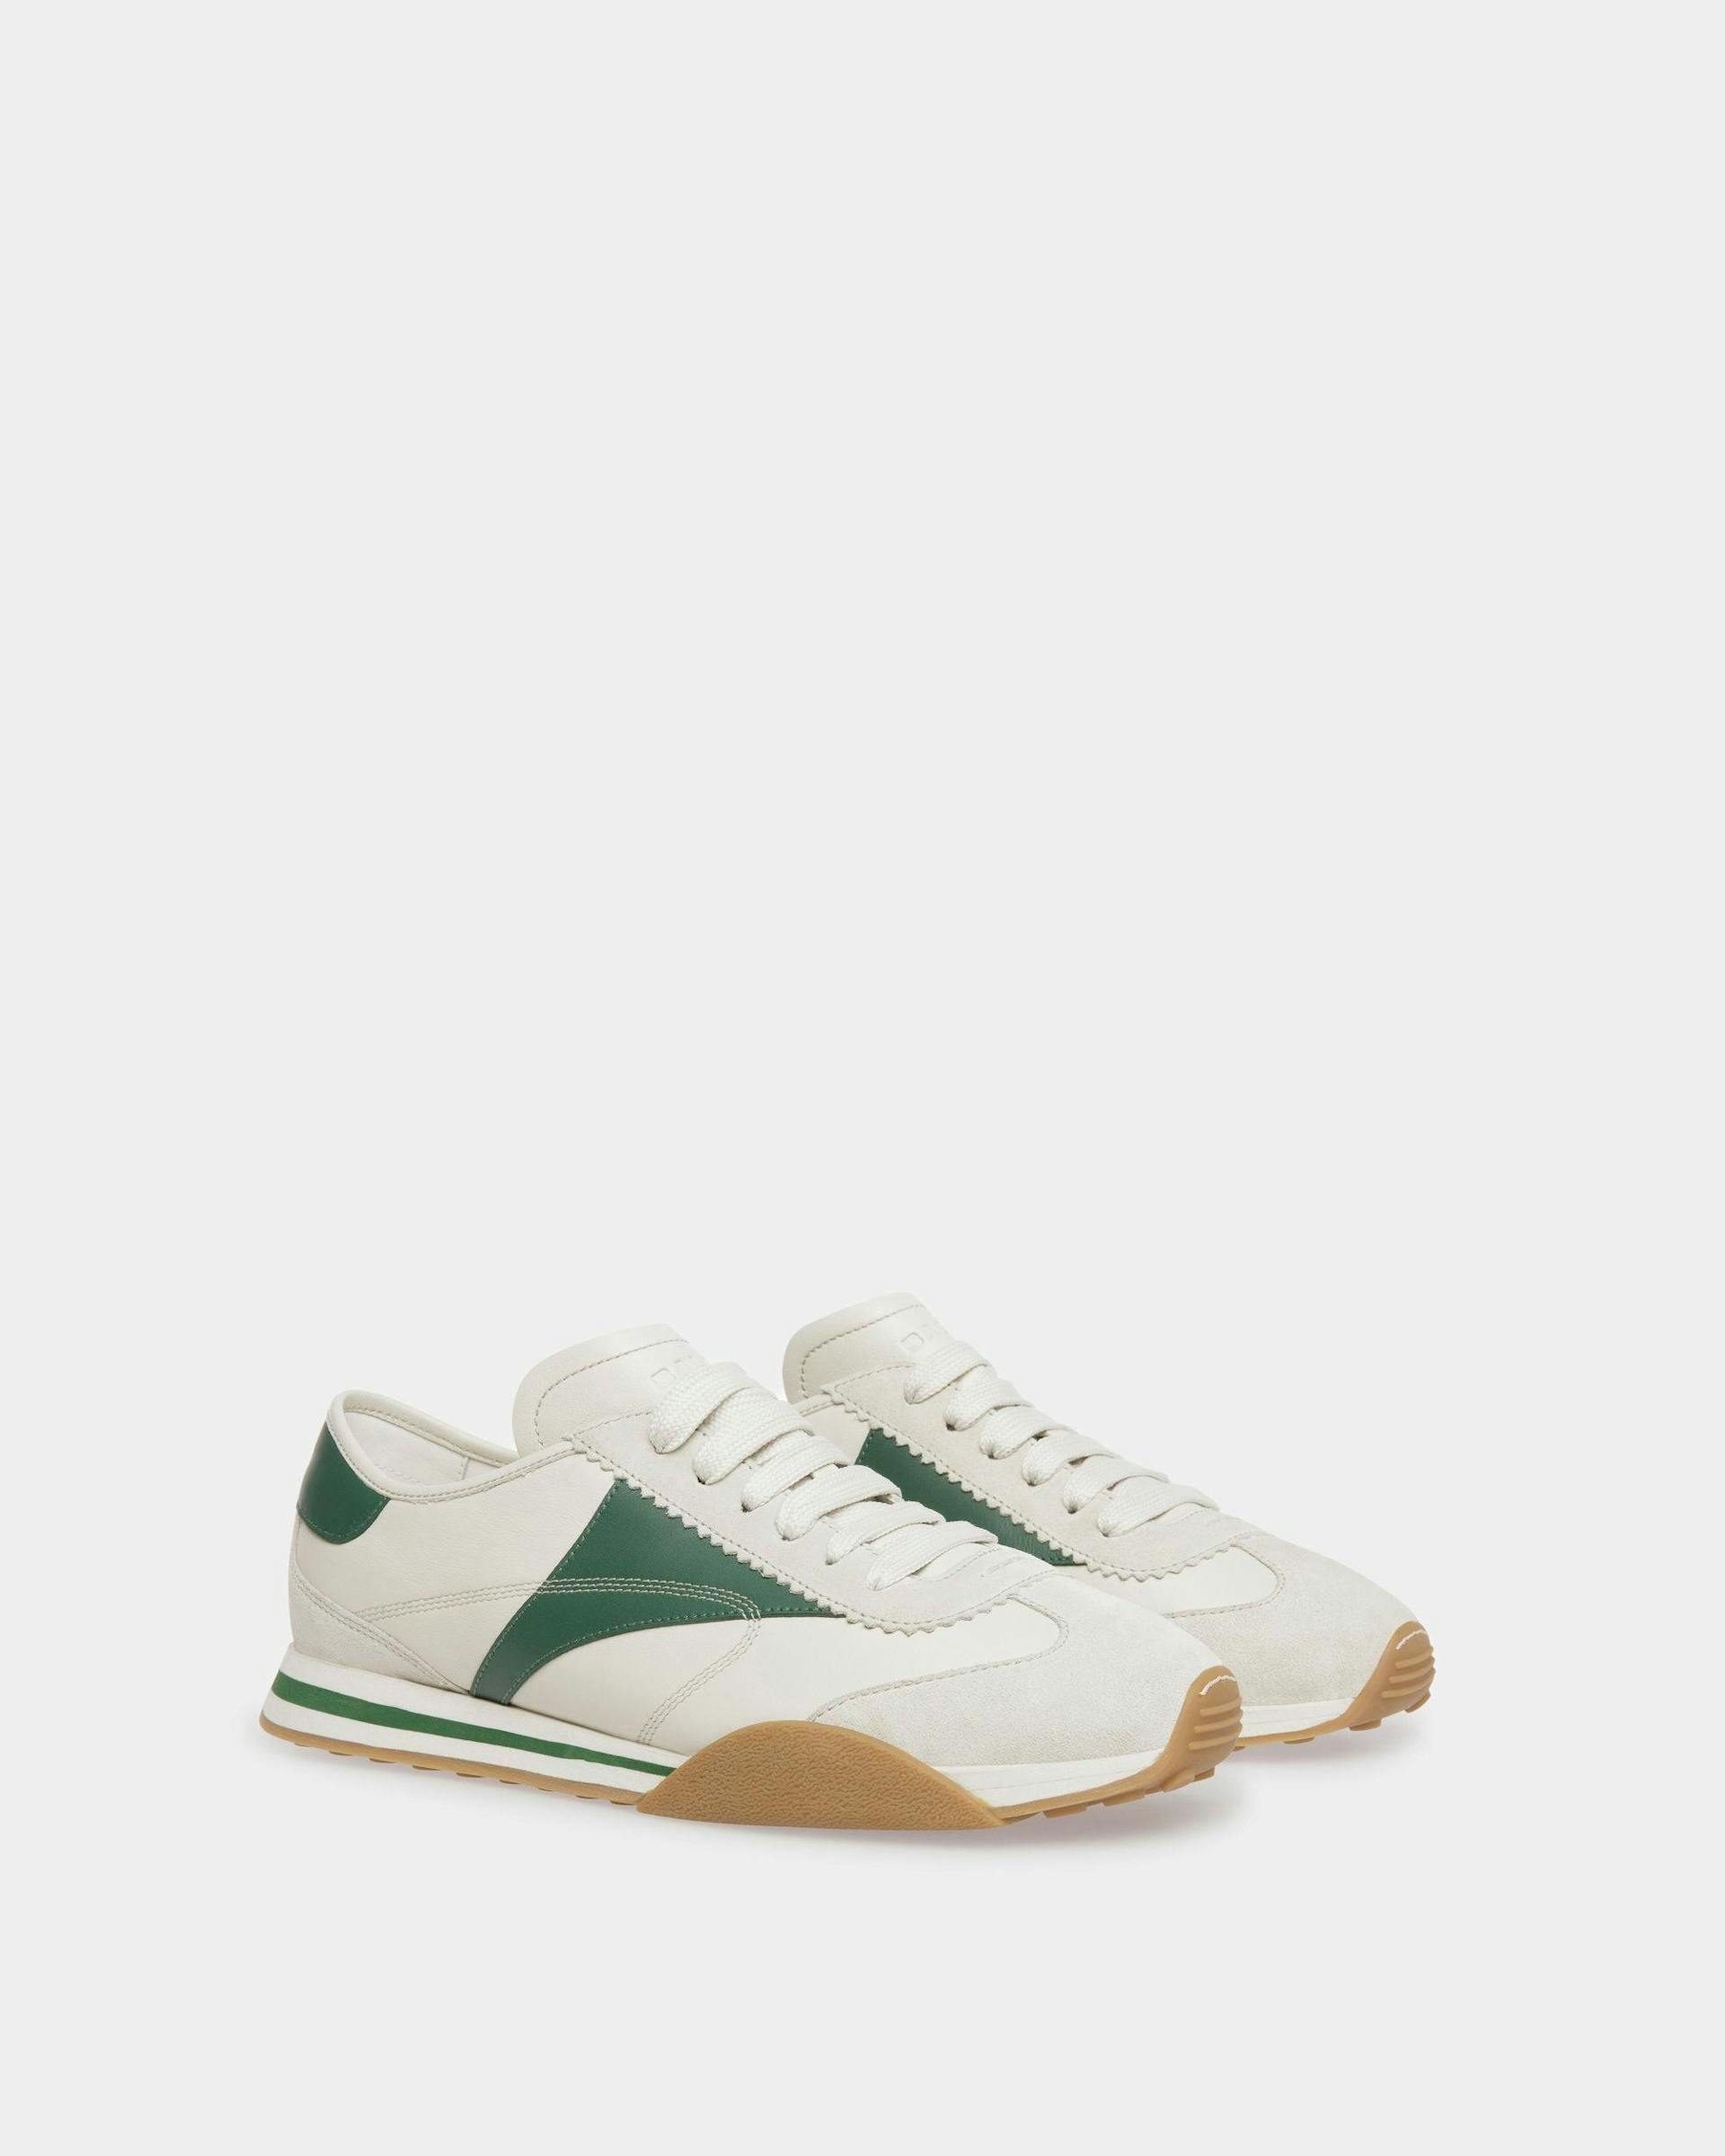 Men's Sussex Sneakers In Dusty White And Kelly Green Leather | Bally | Still Life 3/4 Front